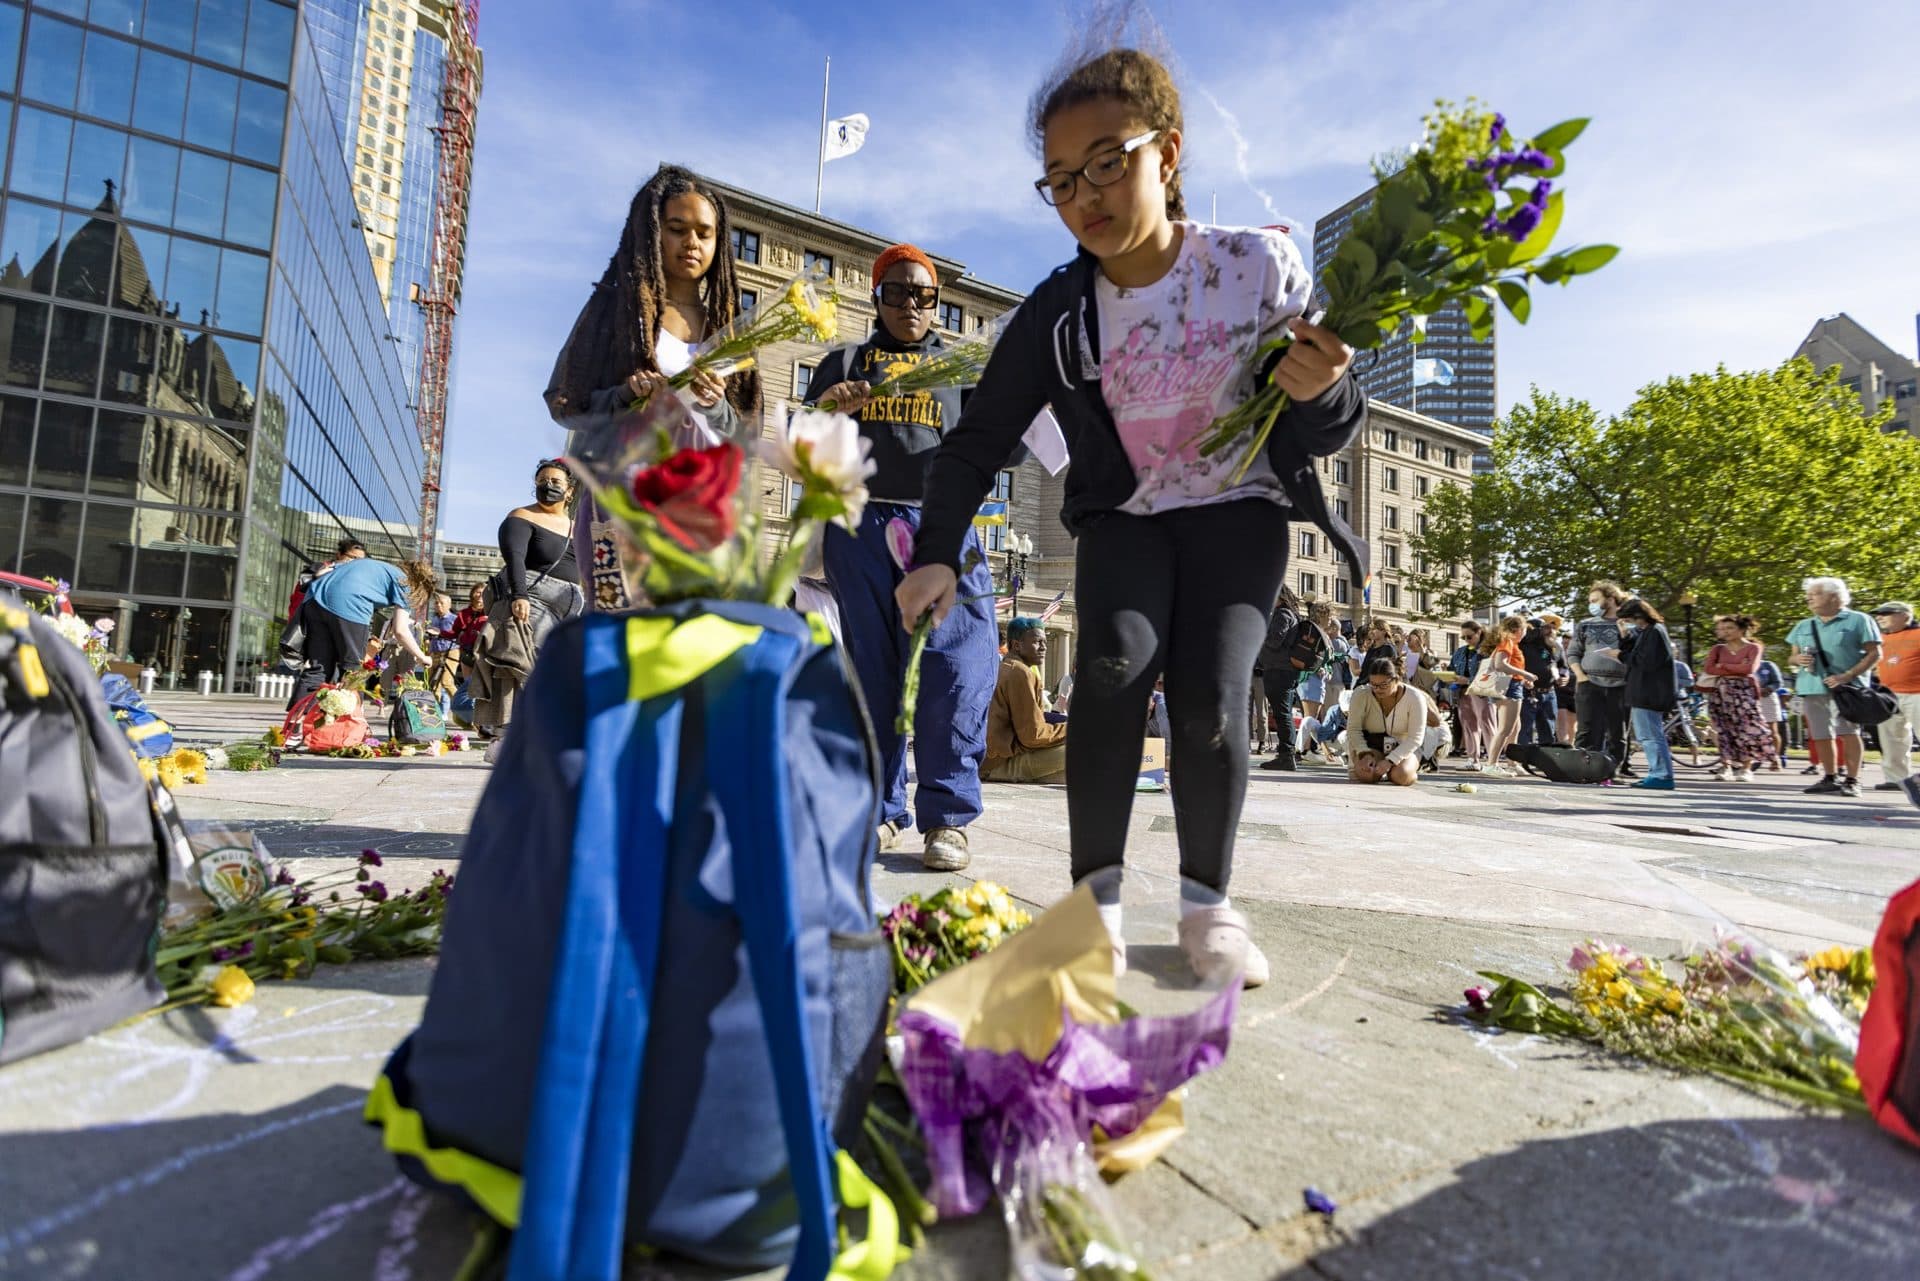 Ten-year-old Emma Lara leaves flowers at one of the backpacks at a memorial in Copley Square remembering the victims of the shooting at Robb Elementary School in Uvalde, Texas. (Jesse Costa/WBUR)